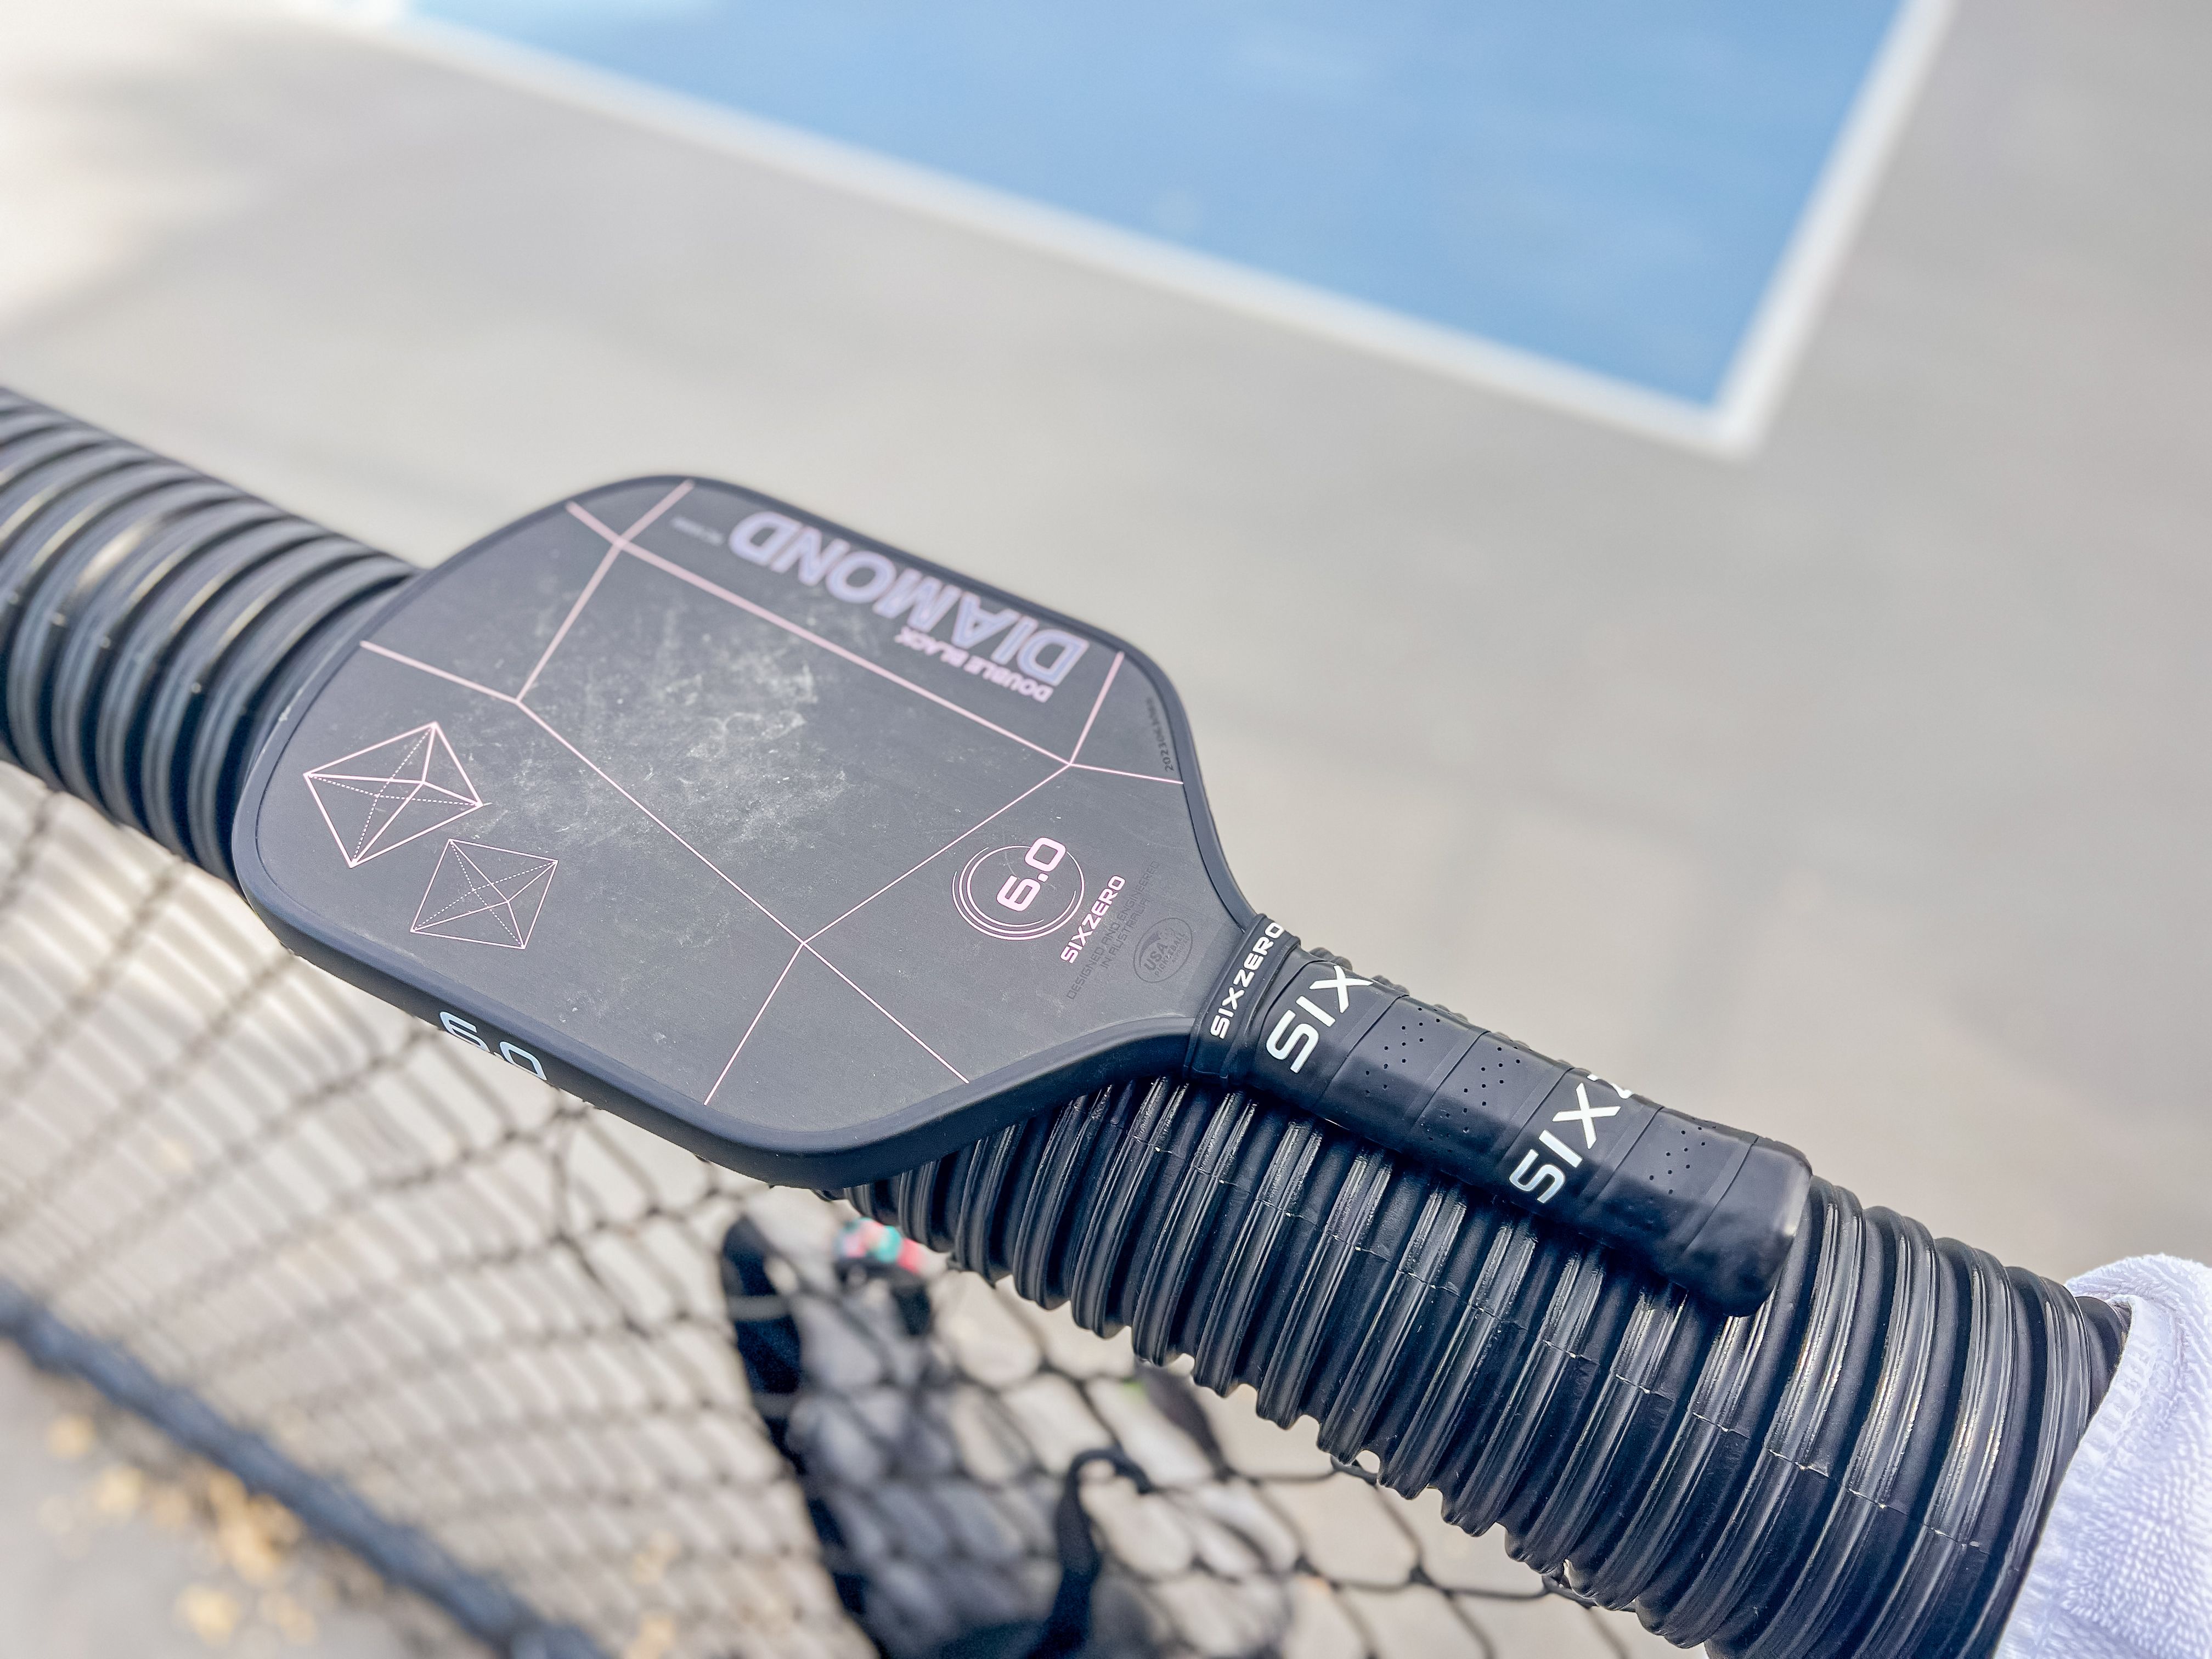 The Six Zero Double Black Diamond Control paddle resting at the side of a pickleball court